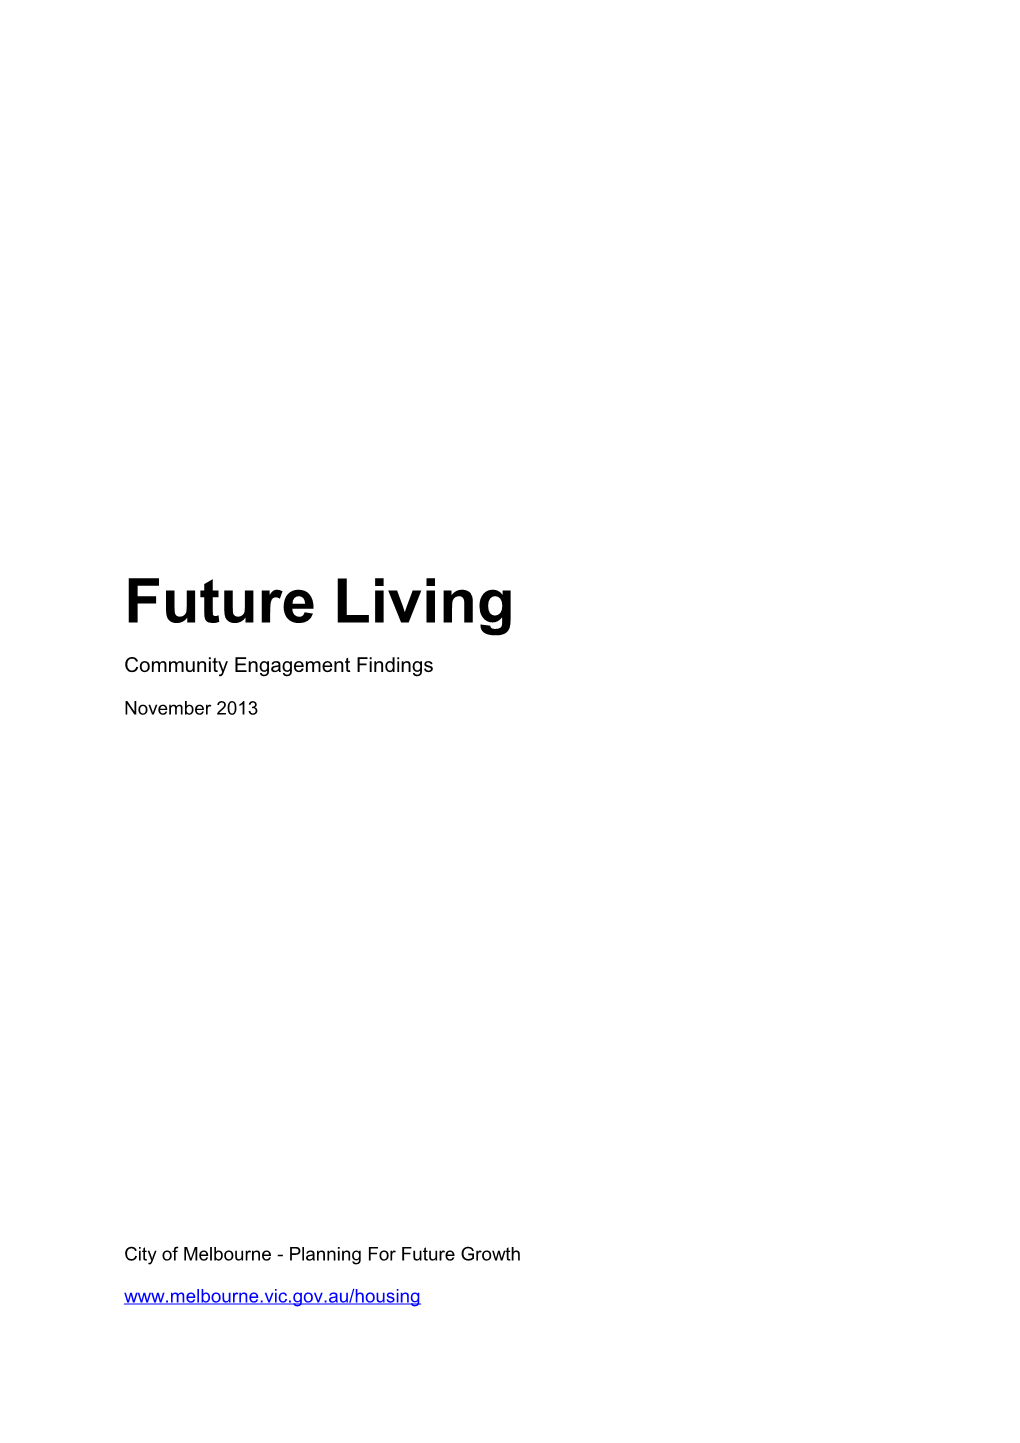 Future Living: Community Engagement Findings